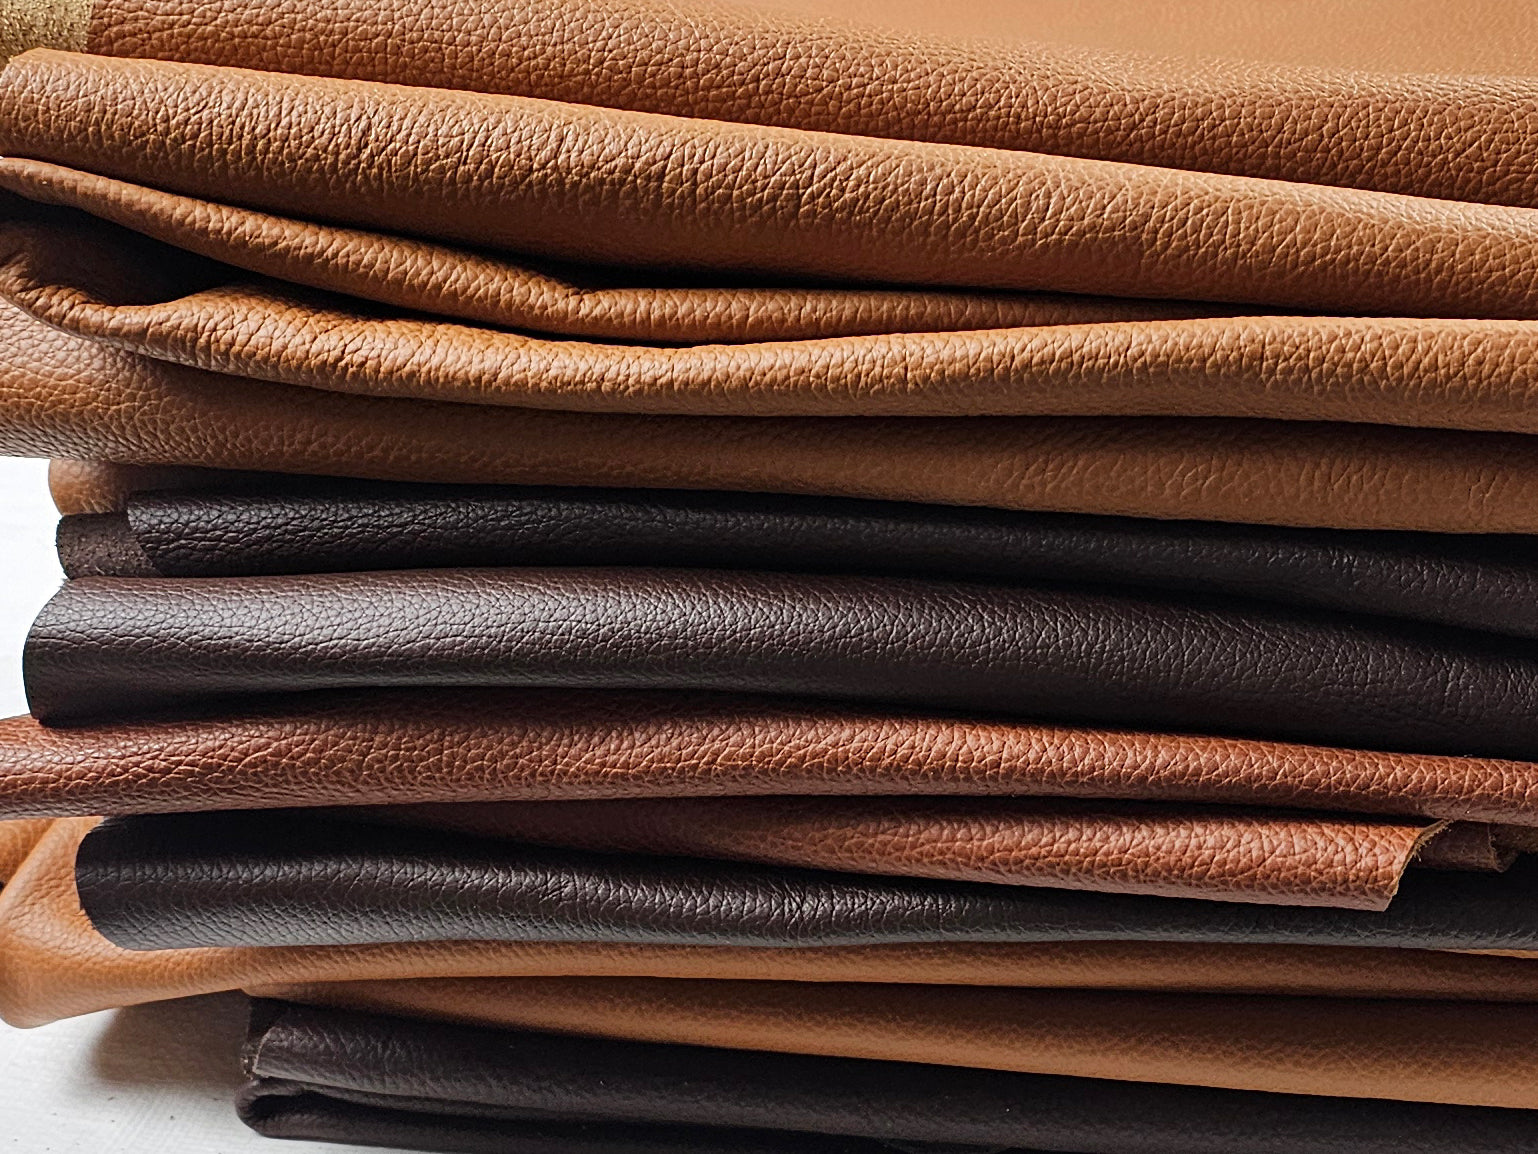 Upholstery leather scraps 1-2 sq. ft - Assorted Brown